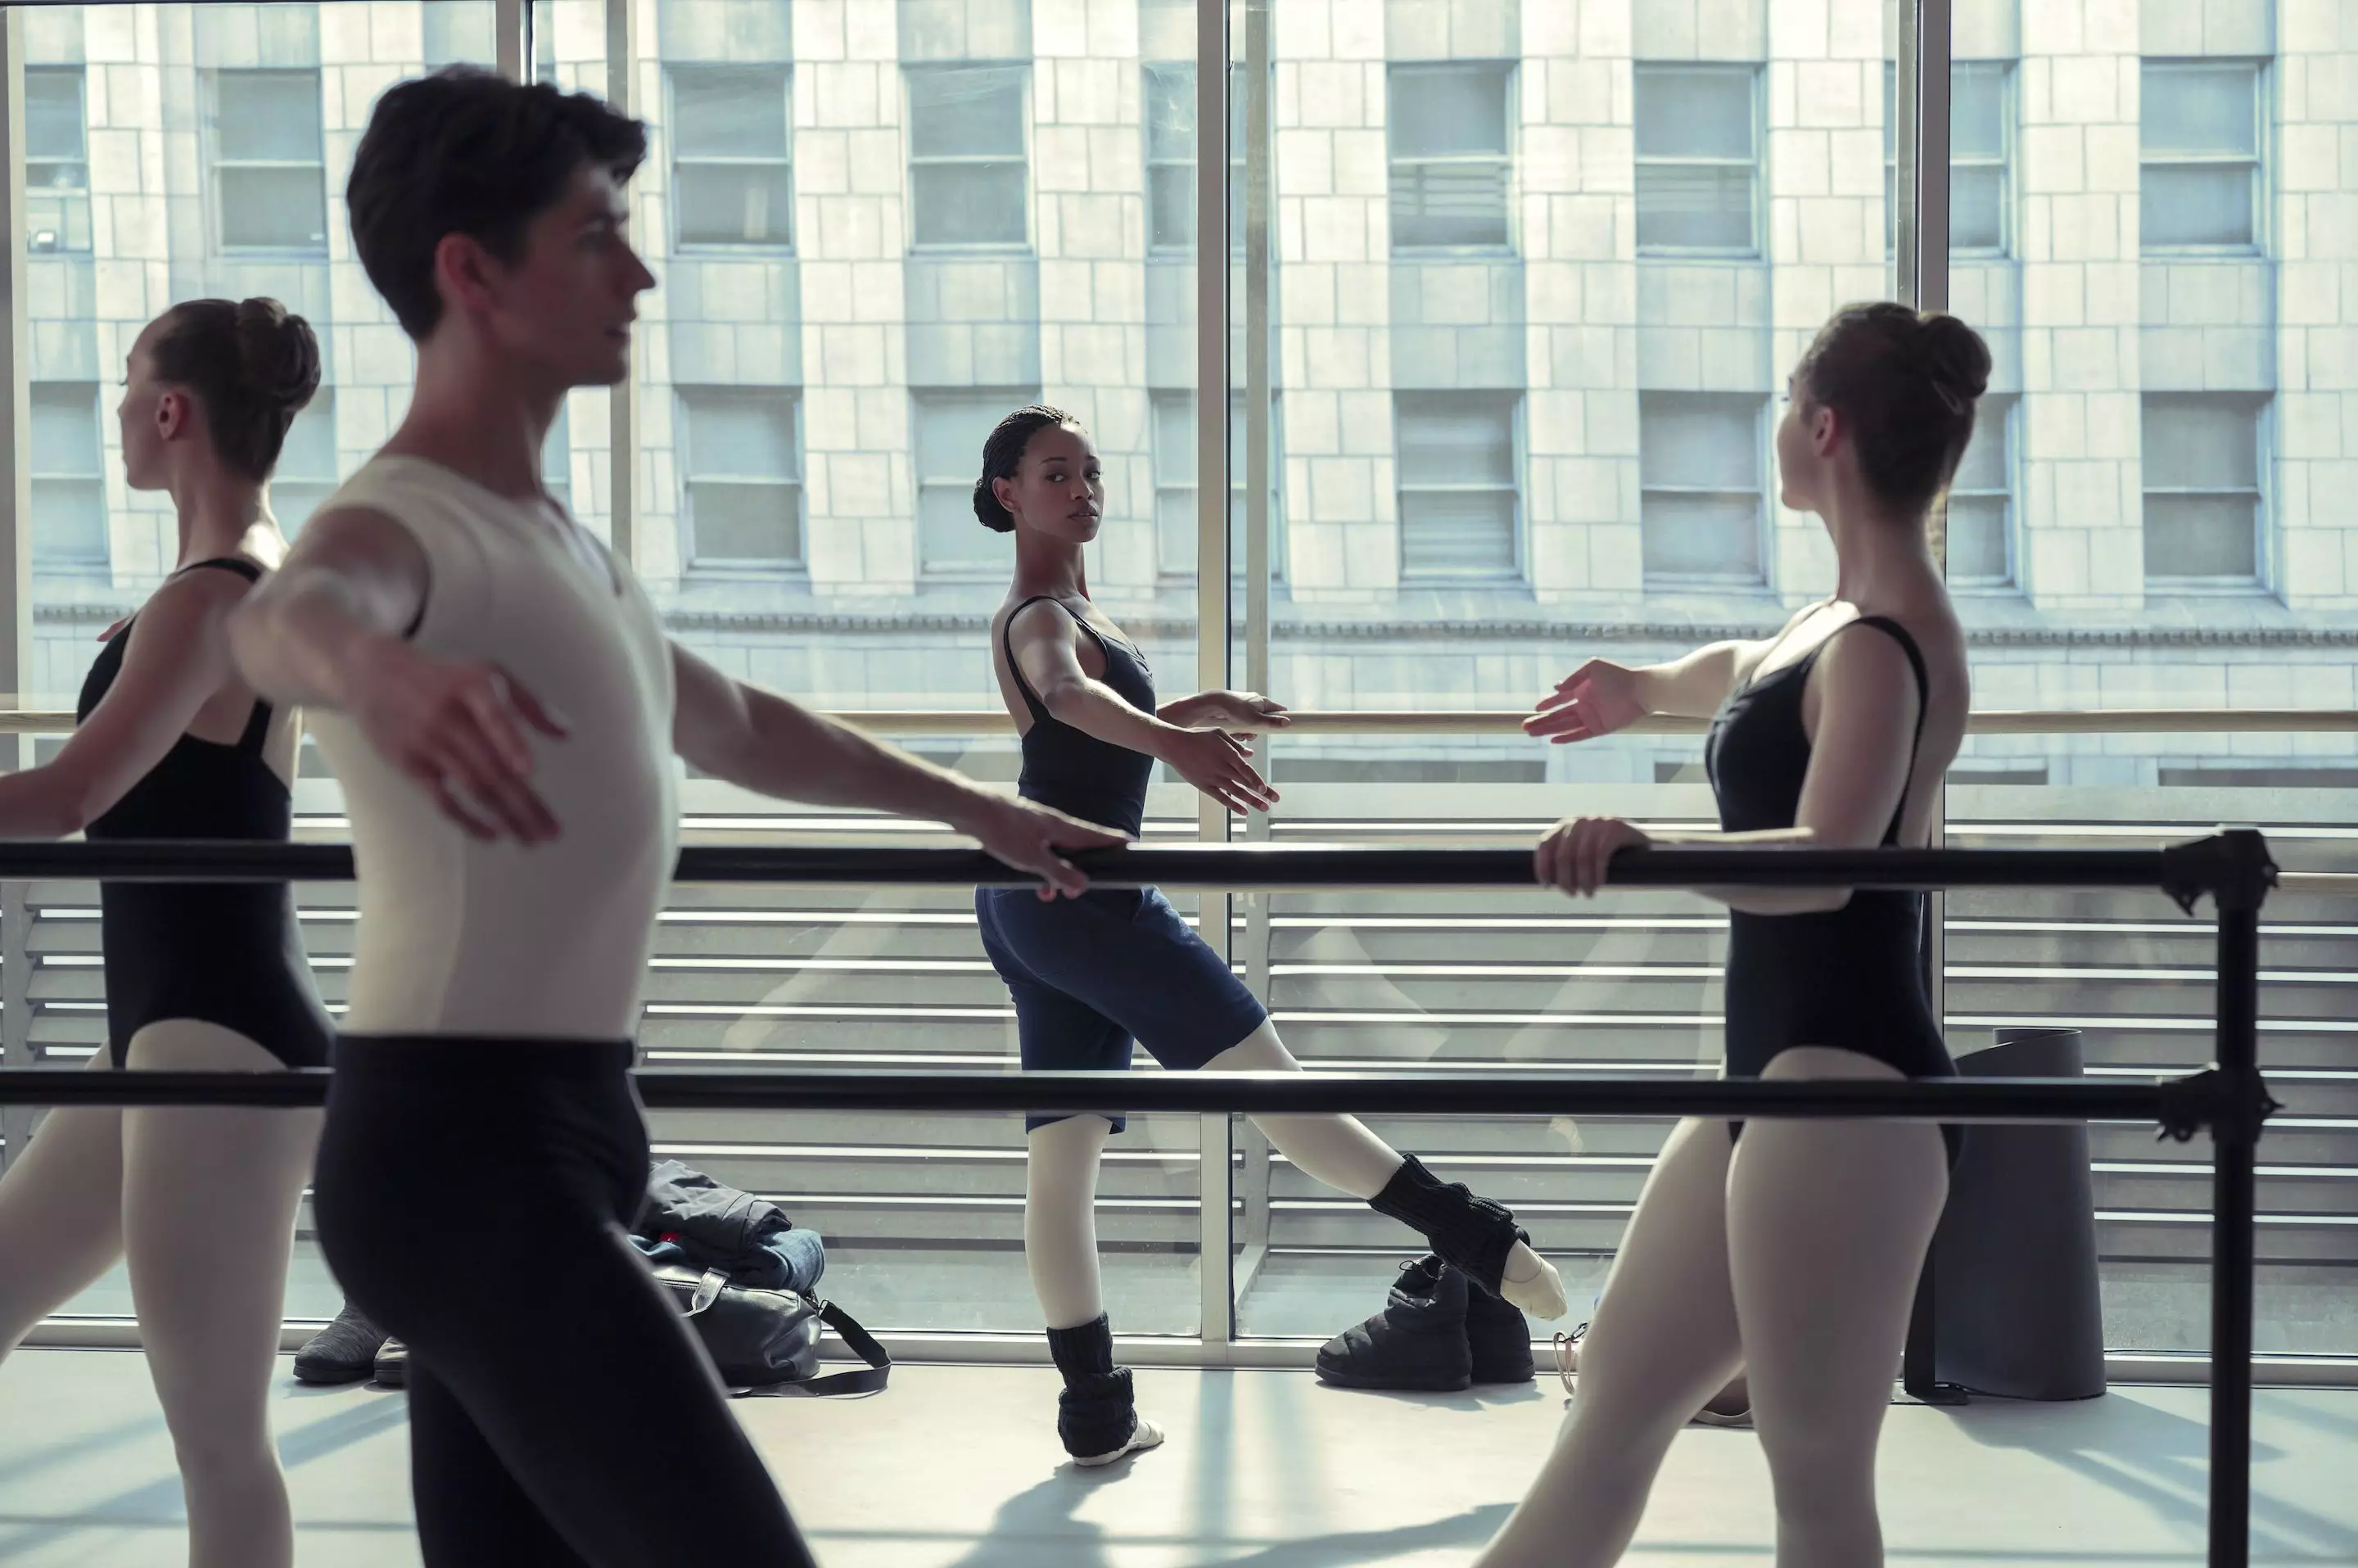 The ballet show is about a lot more than just dance (